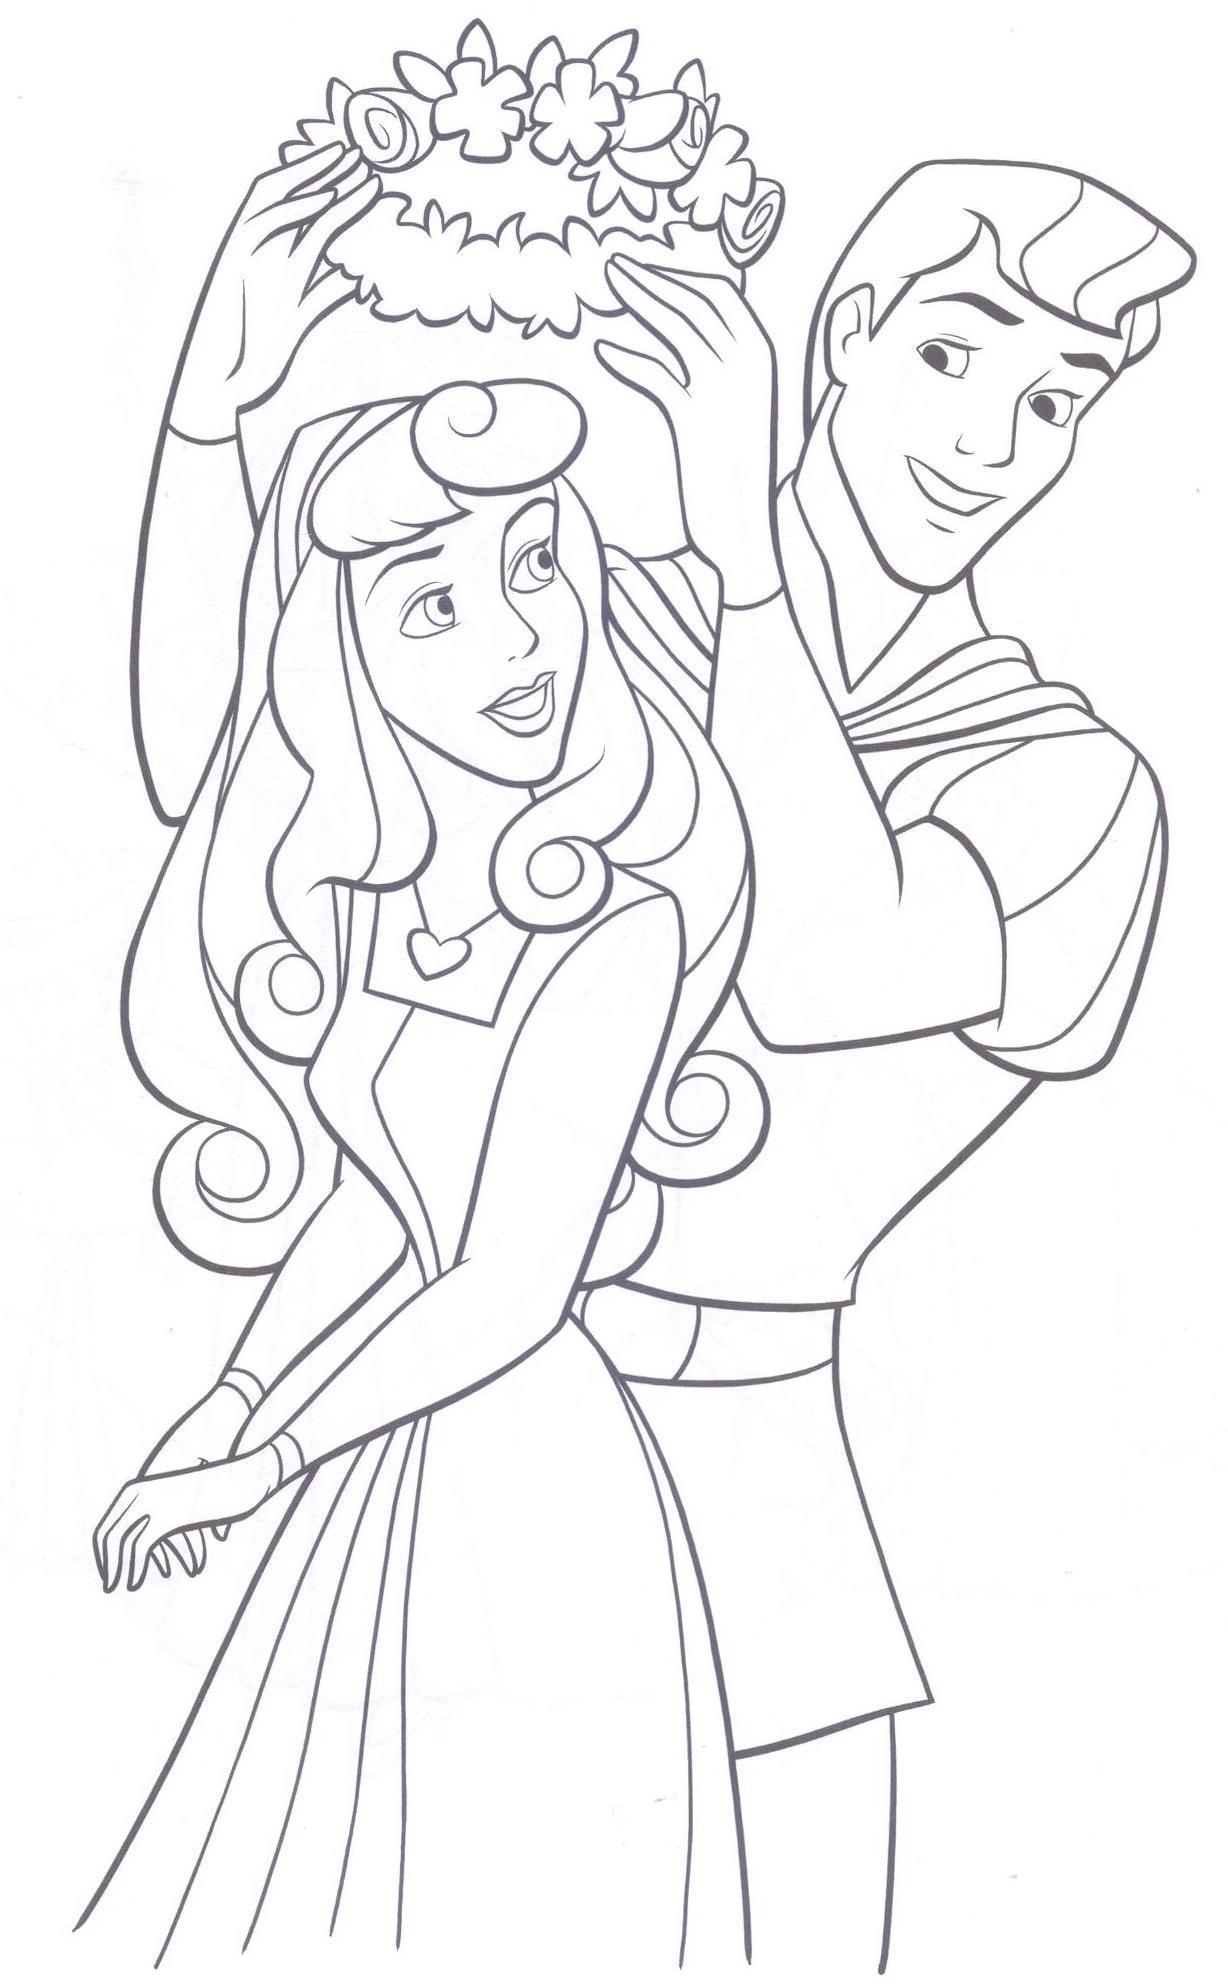 Sleeping Beauty Coloring Page Coloring Pages Pinterest